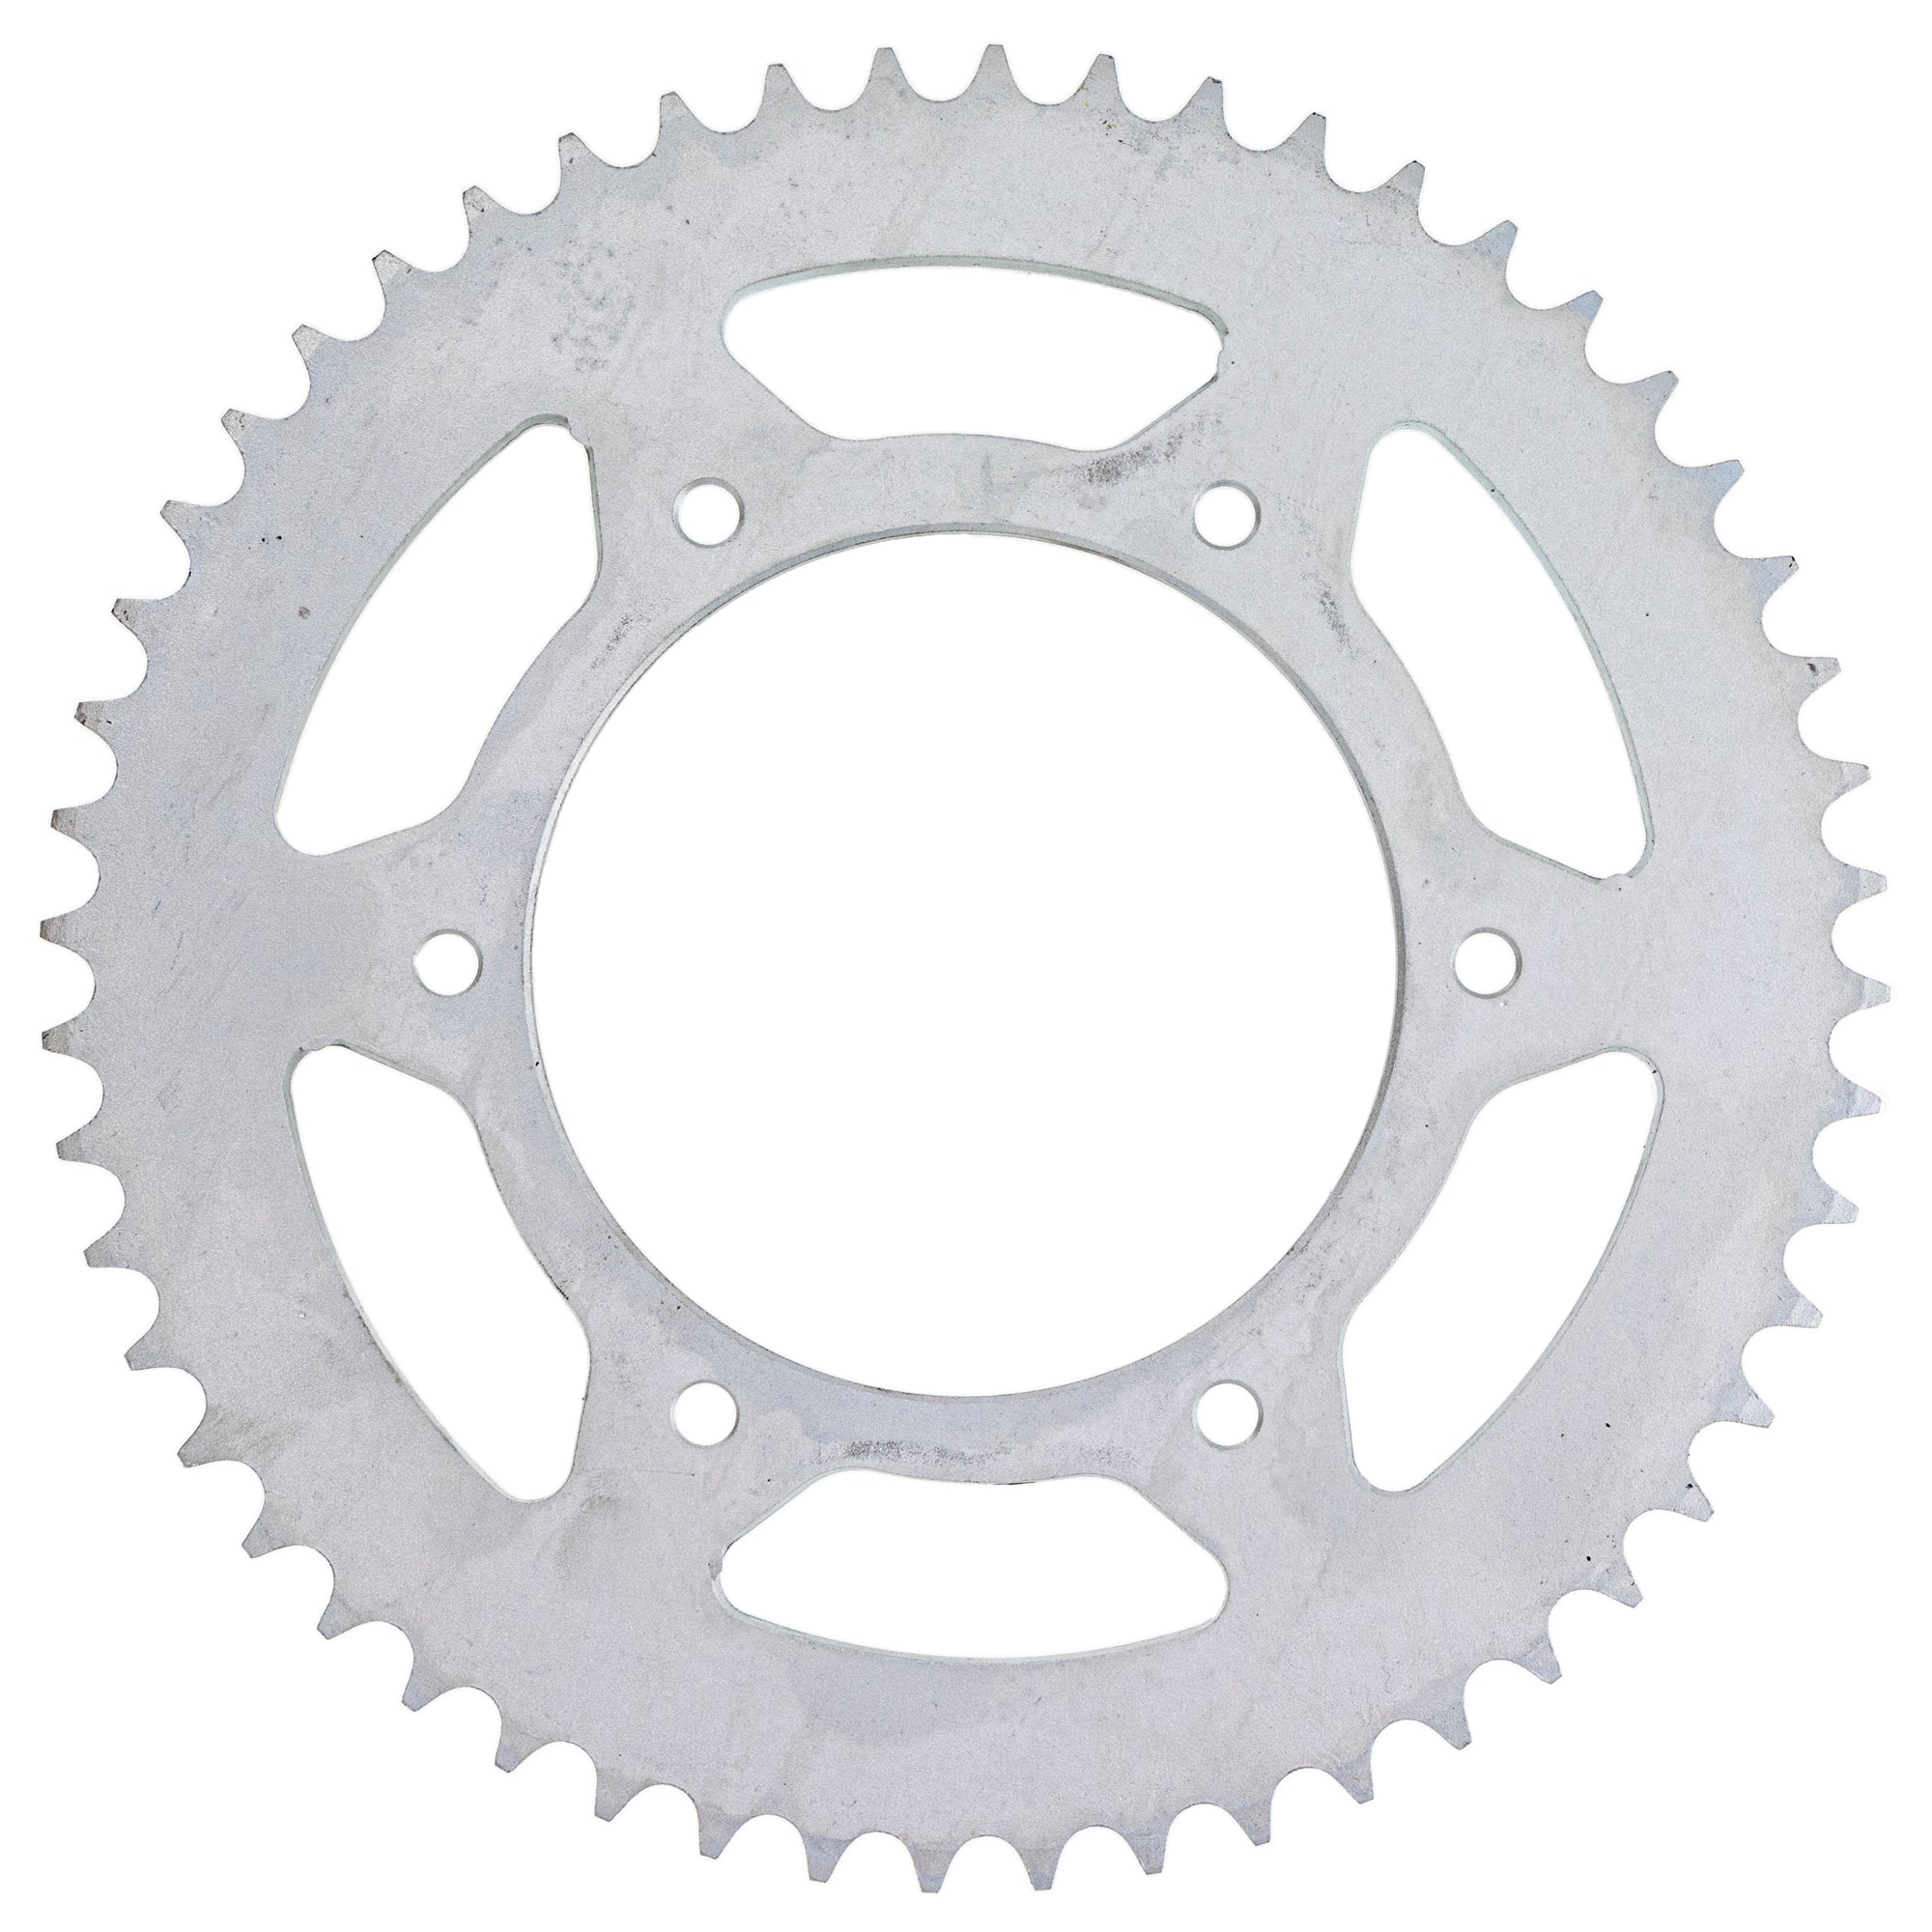 520 Pitch Front 13T Rear 52T Drive Sprocket Kit for KTM 250 450 125